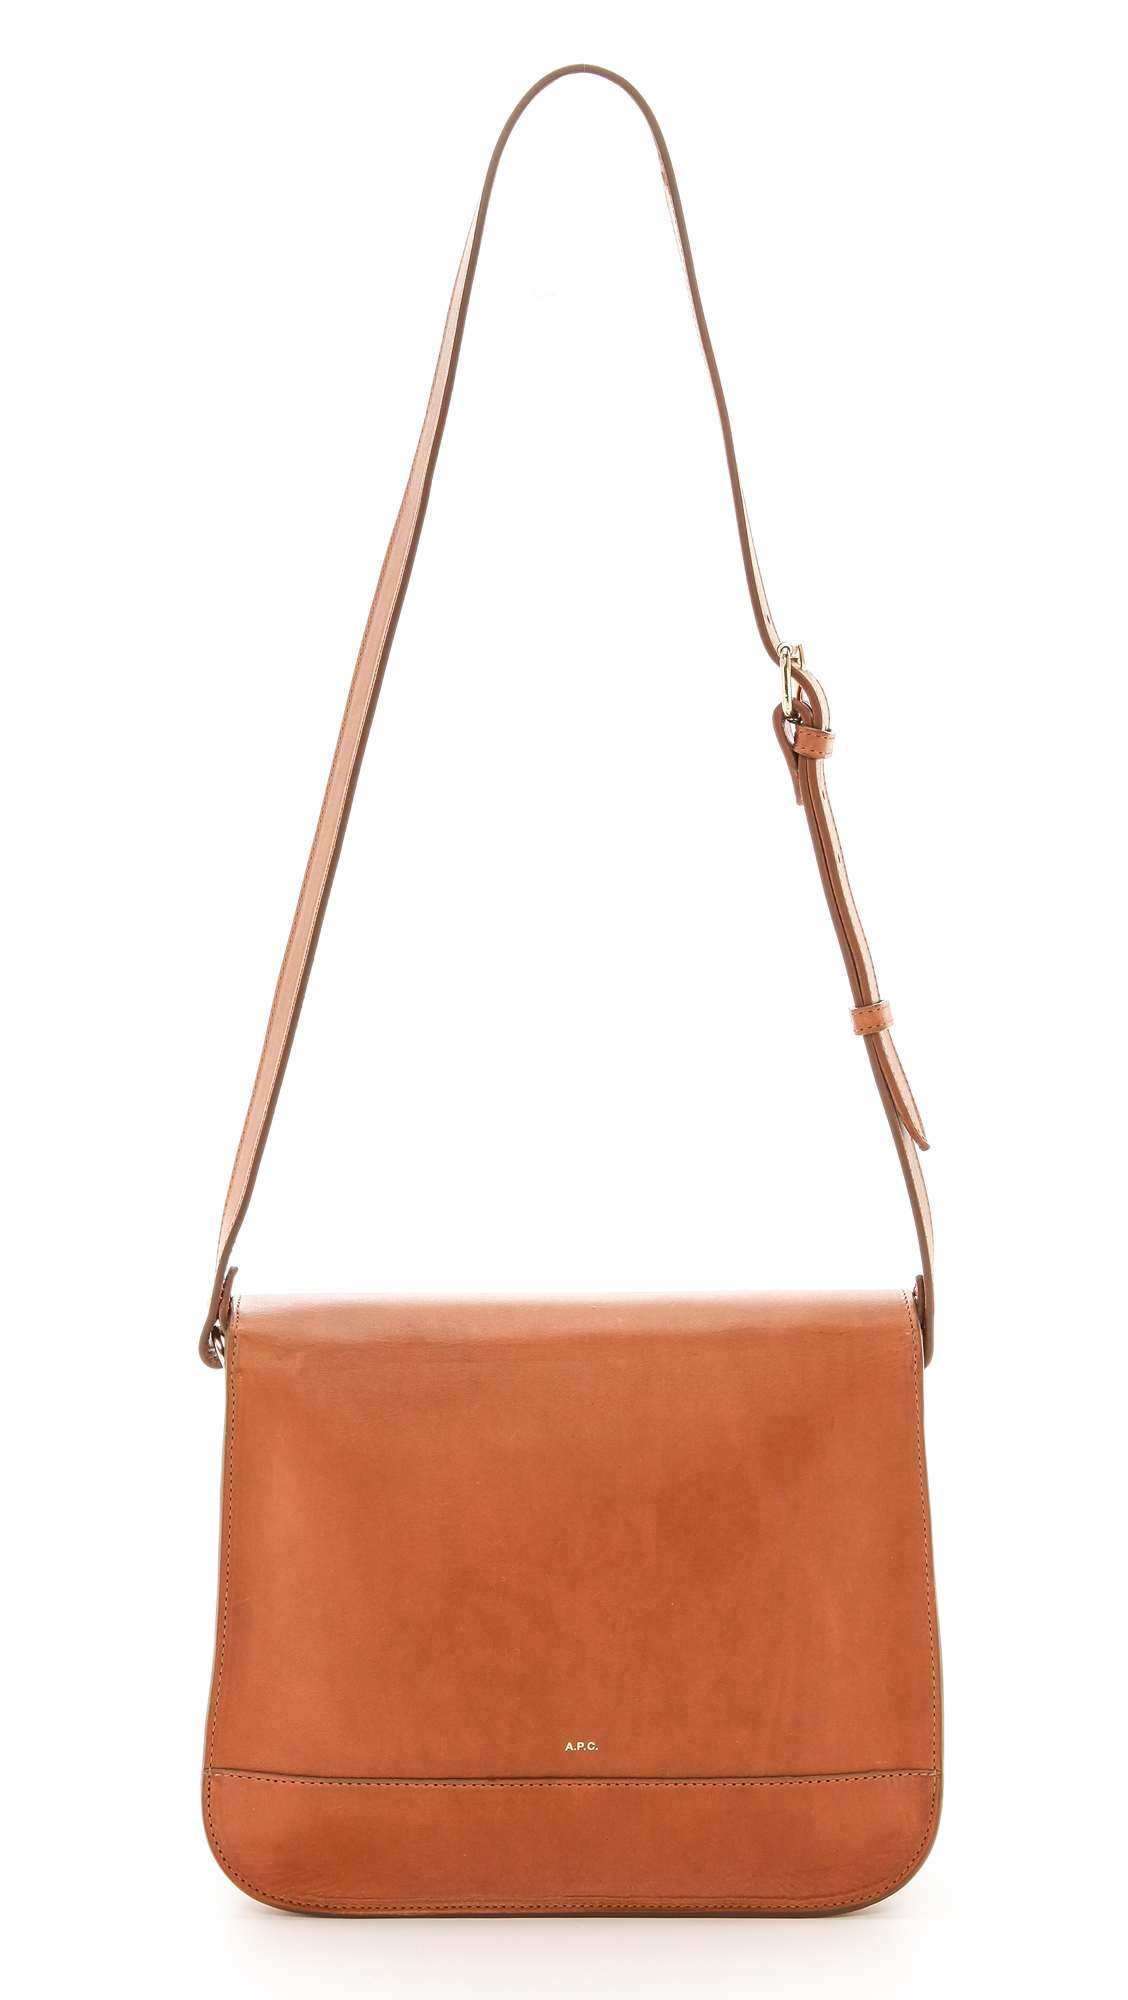 Lyst - A.p.c. Suzanne Bag - Marron Fonce in Brown